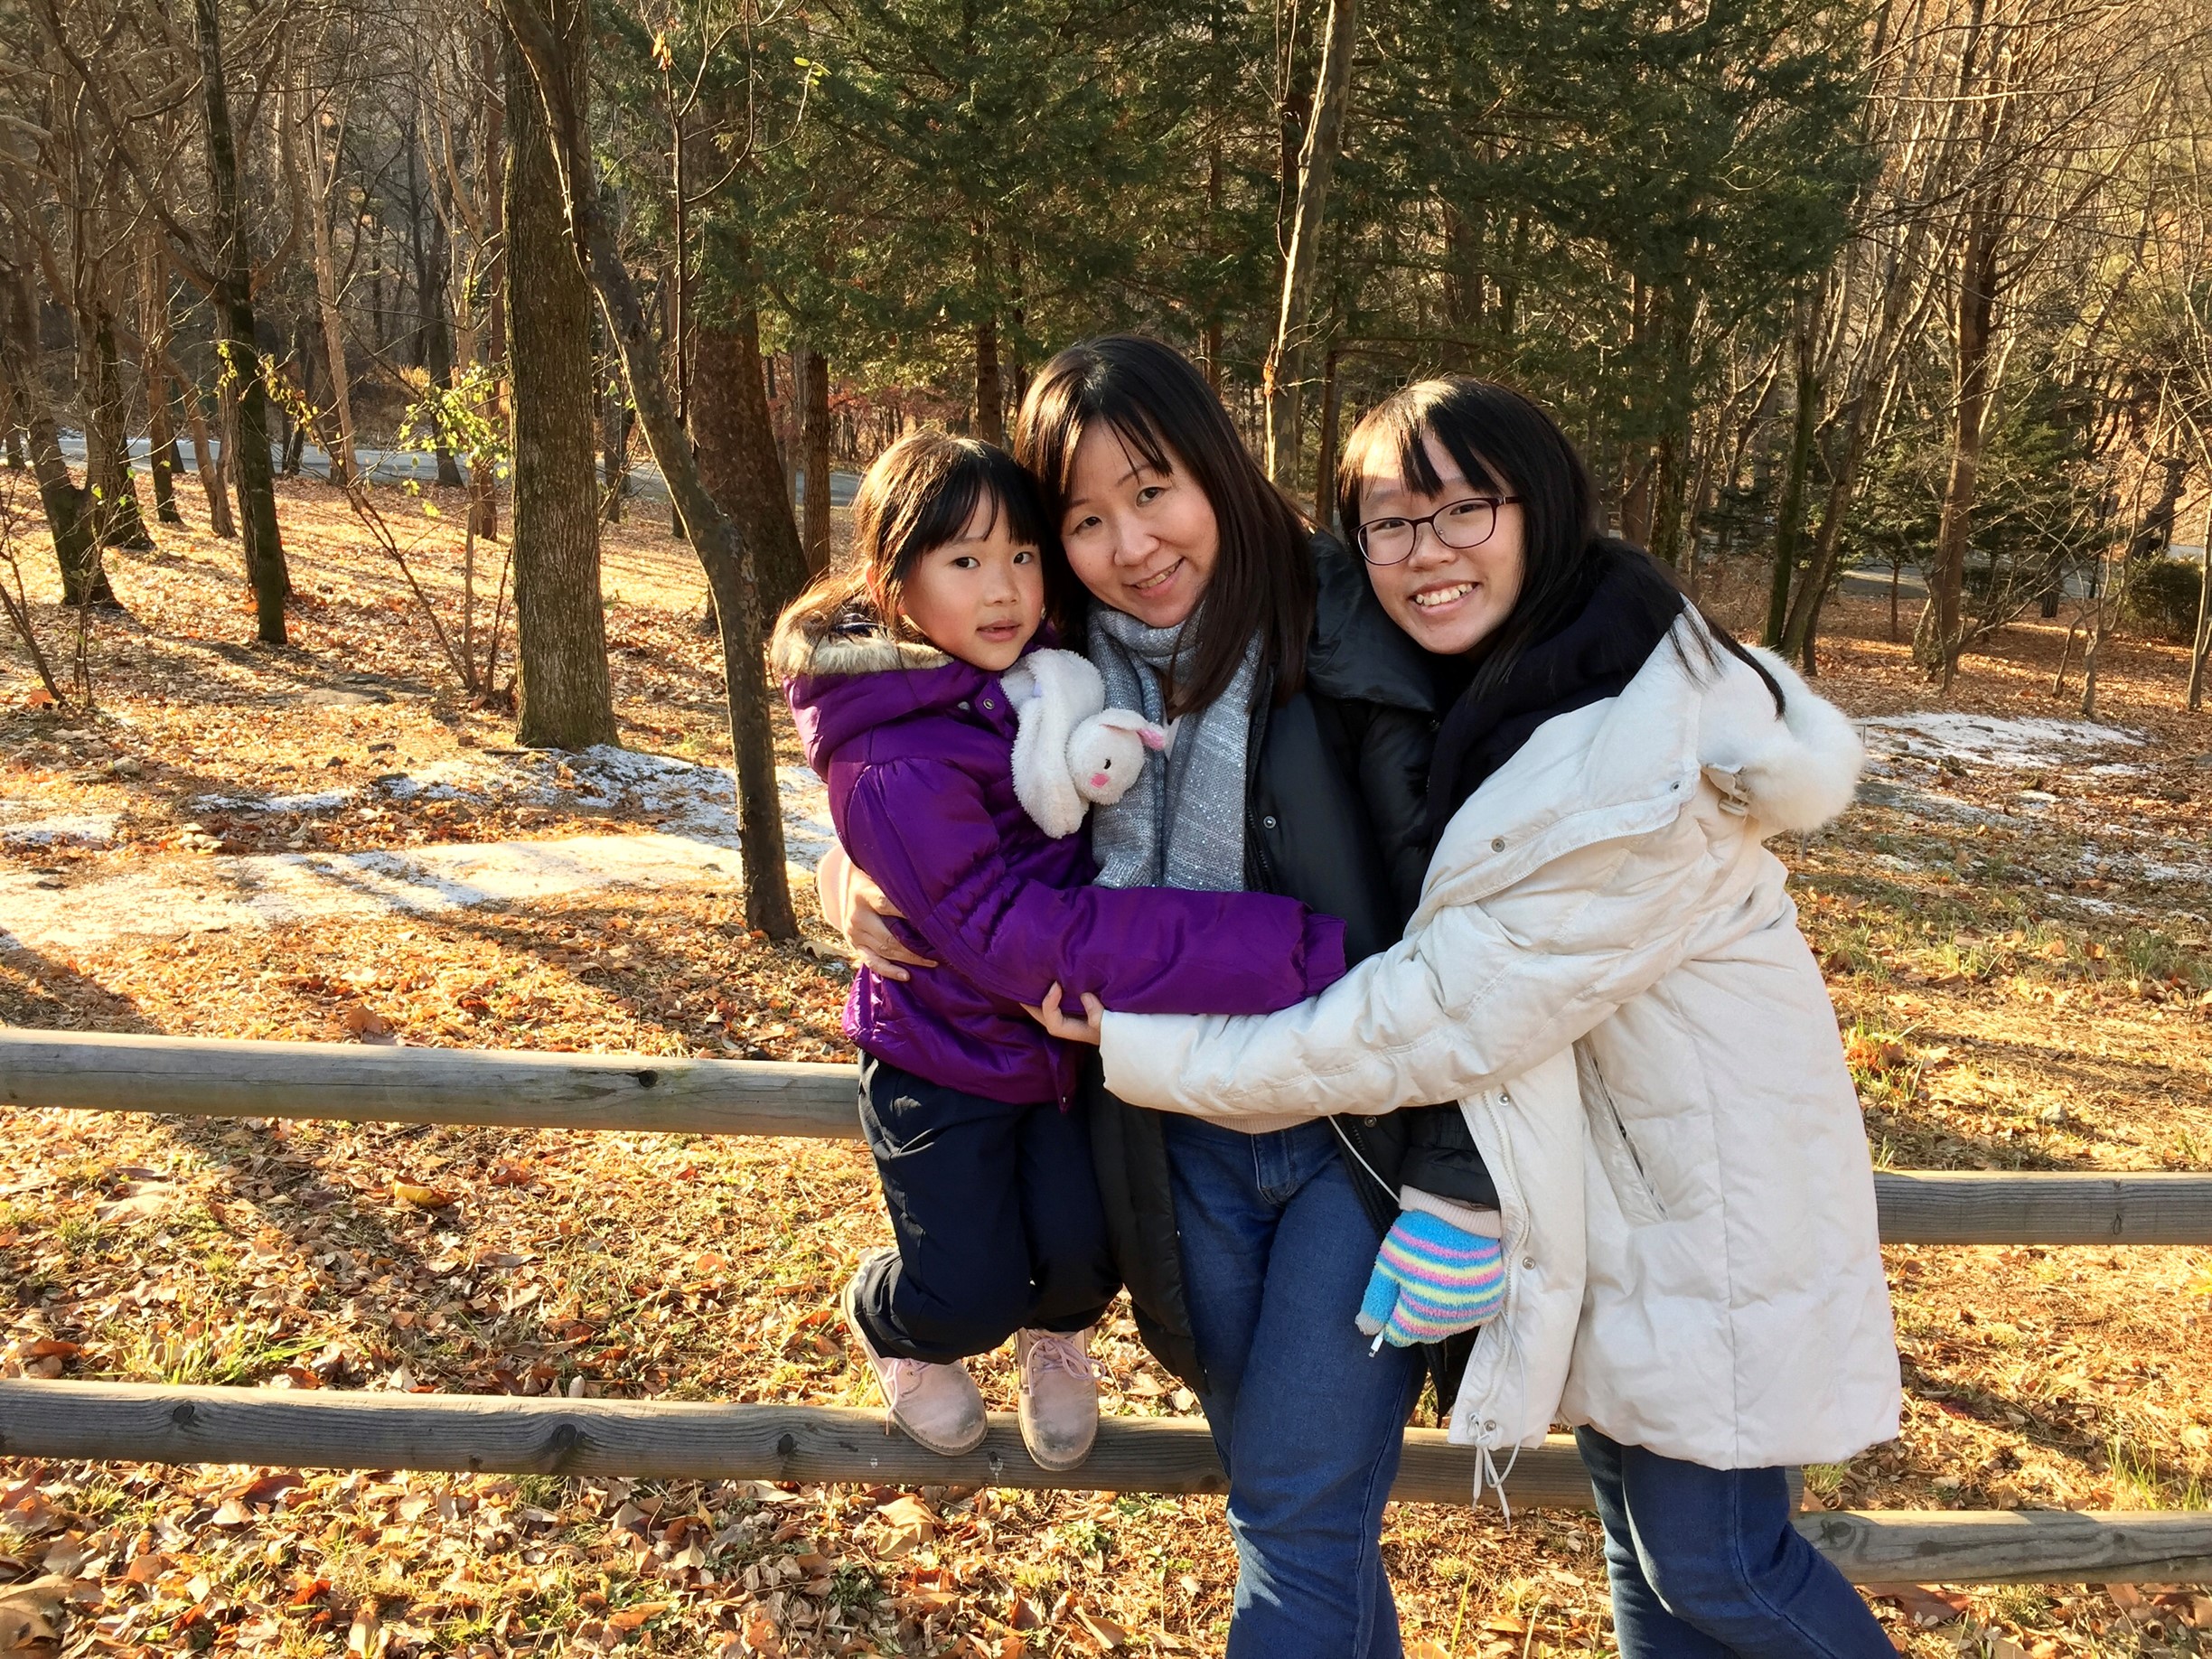 Assistant Vice President of AT&T Global Services, Lee Geck Pheng, and her two daughters. Image courtesy of Lee Geck Pheng.